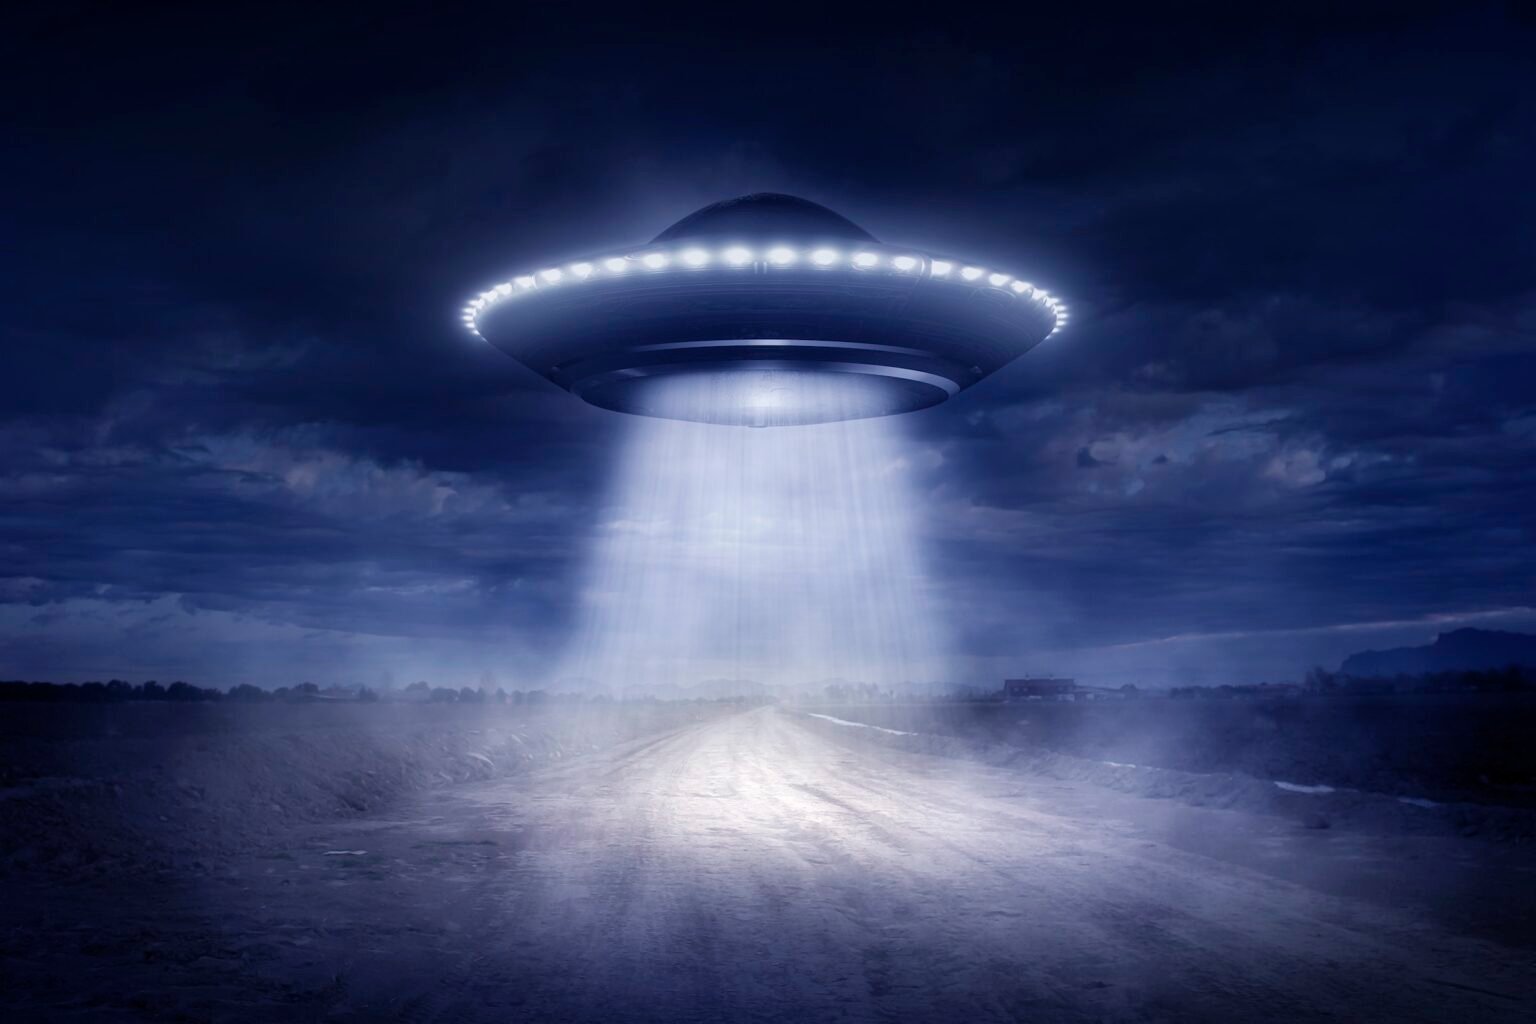 Are alien hunters getting younger? Find out how a couple of schoolgirls managed to capture evidence that just might prove UFOs are real.